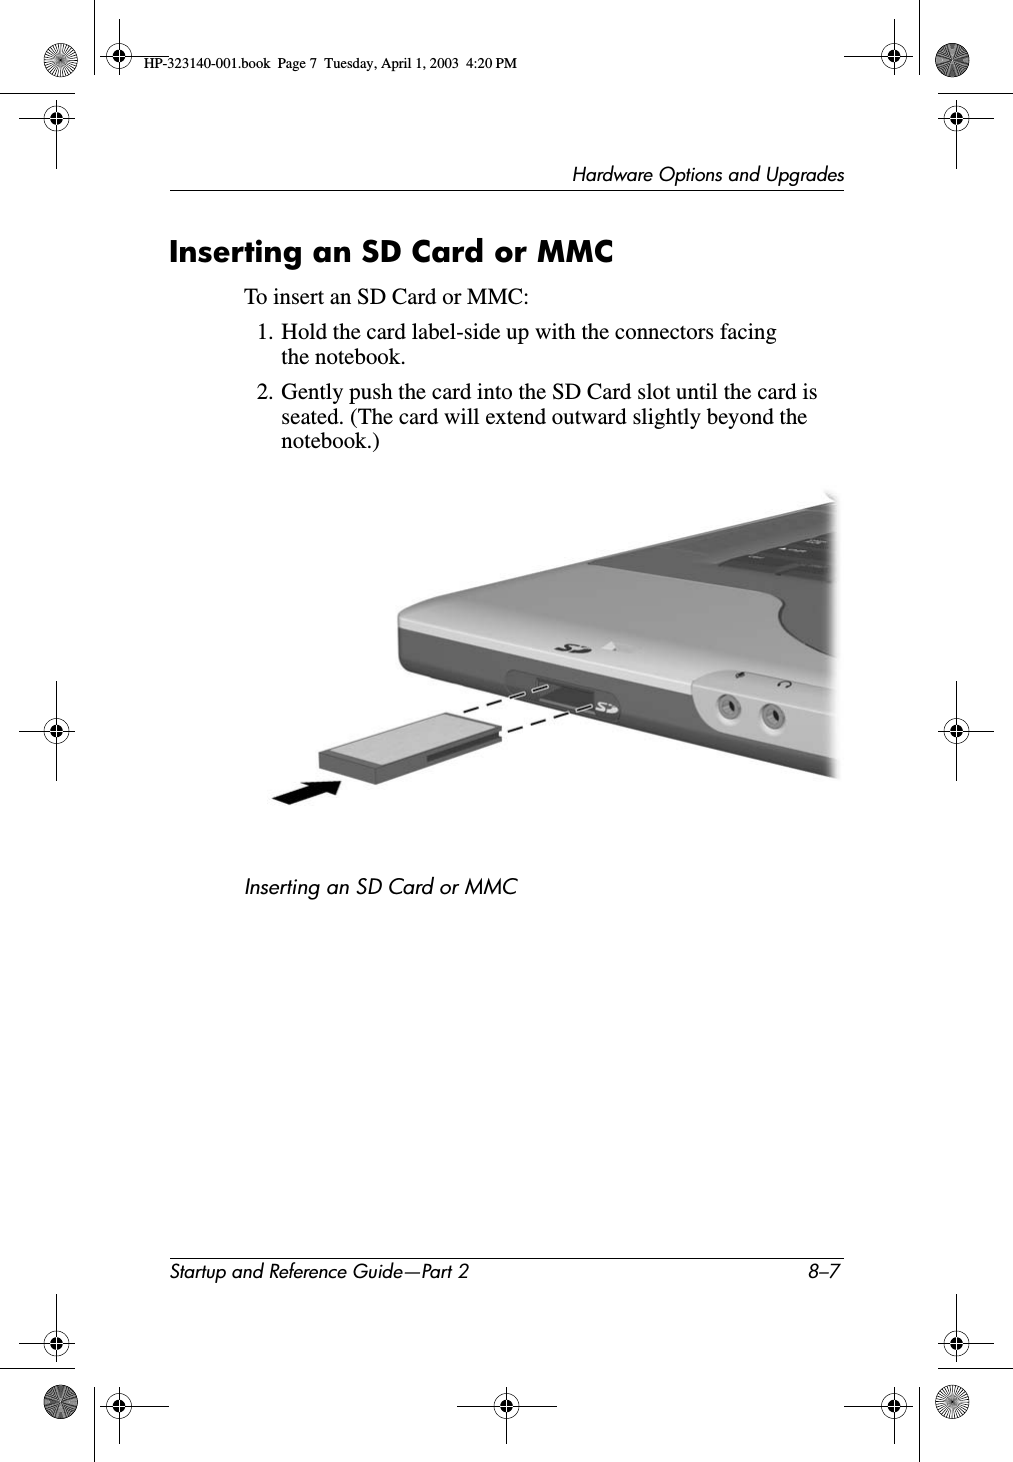 Hardware Options and UpgradesStartup and Reference Guide—Part 2 8–7Inserting an SD Card or MMCTo insert an SD Card or MMC:1. Hold the card label-side up with the connectors facing the notebook.2. Gently push the card into the SD Card slot until the card is seated. (The card will extend outward slightly beyond the notebook.)Inserting an SD Card or MMCHP-323140-001.book  Page 7  Tuesday, April 1, 2003  4:20 PM